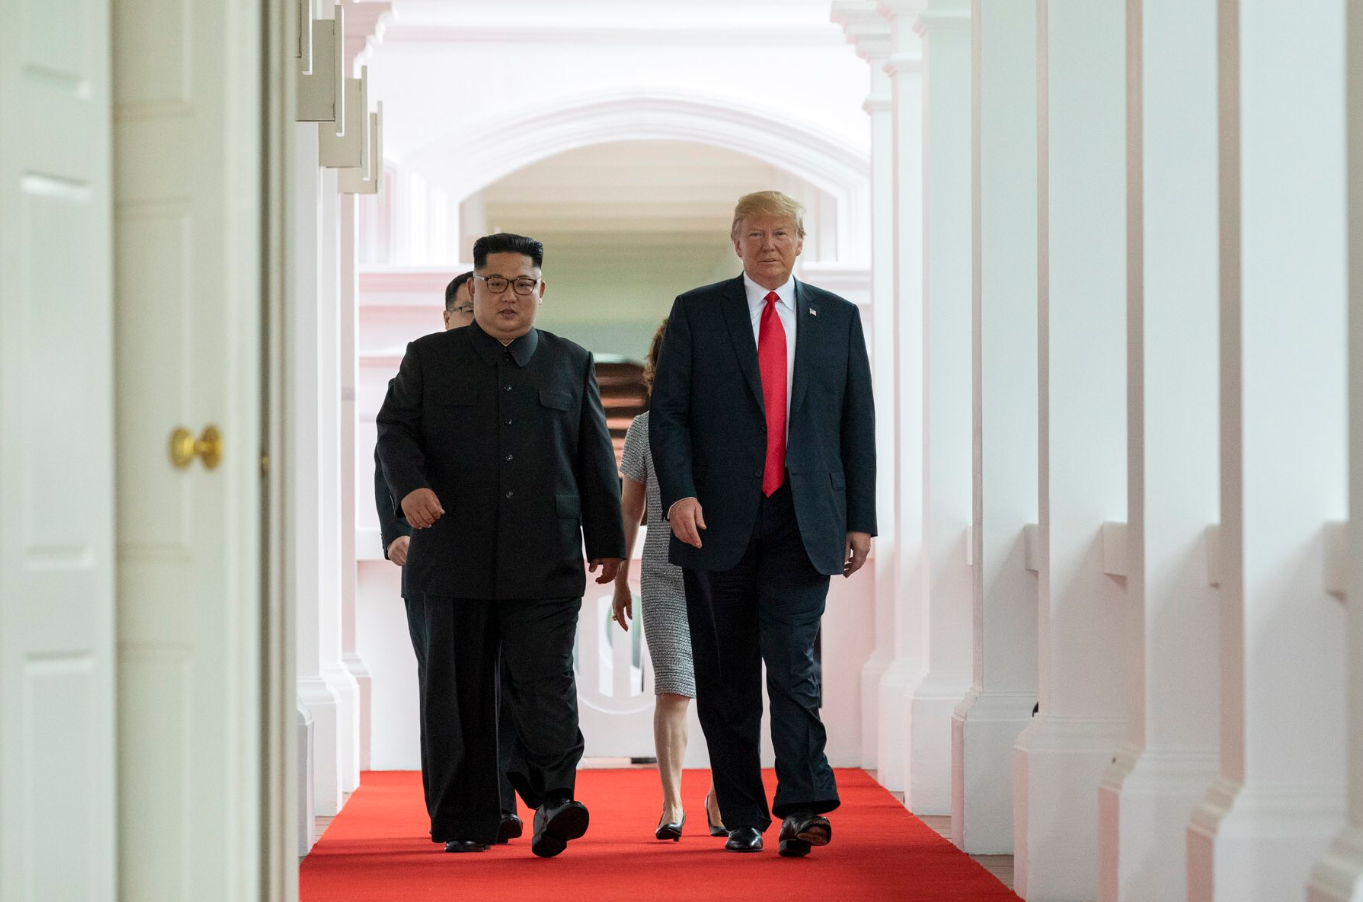 Kim and Trump walking to the summit room during the DPRK–USA Singapore Summit / Trump-Kim